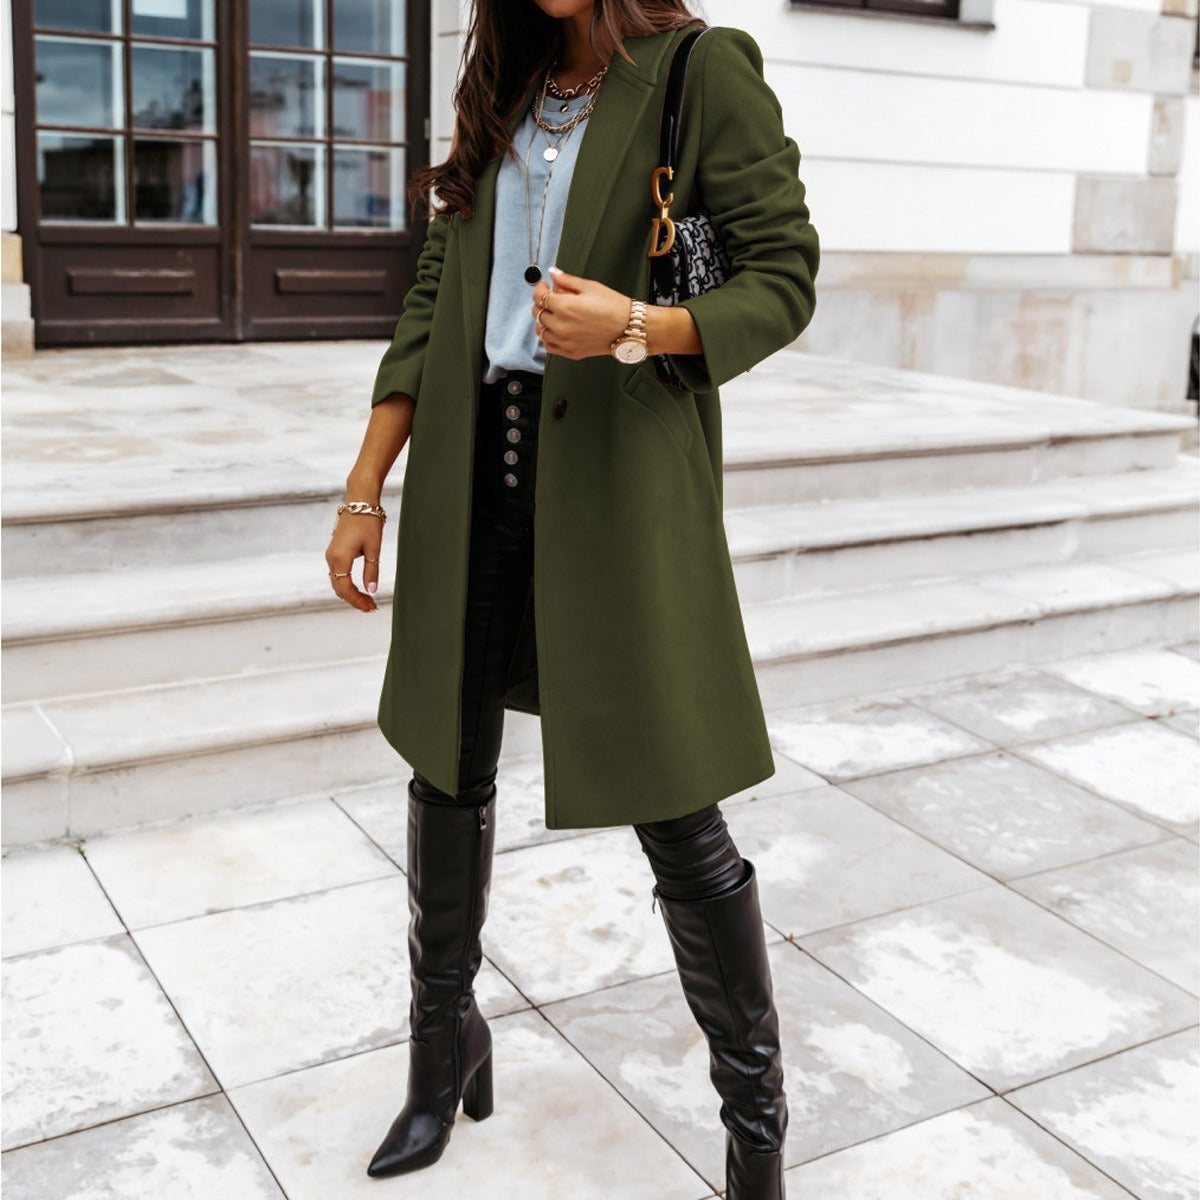 New autumn and winter women's solid color lapel mid length button down woolen coat jacket